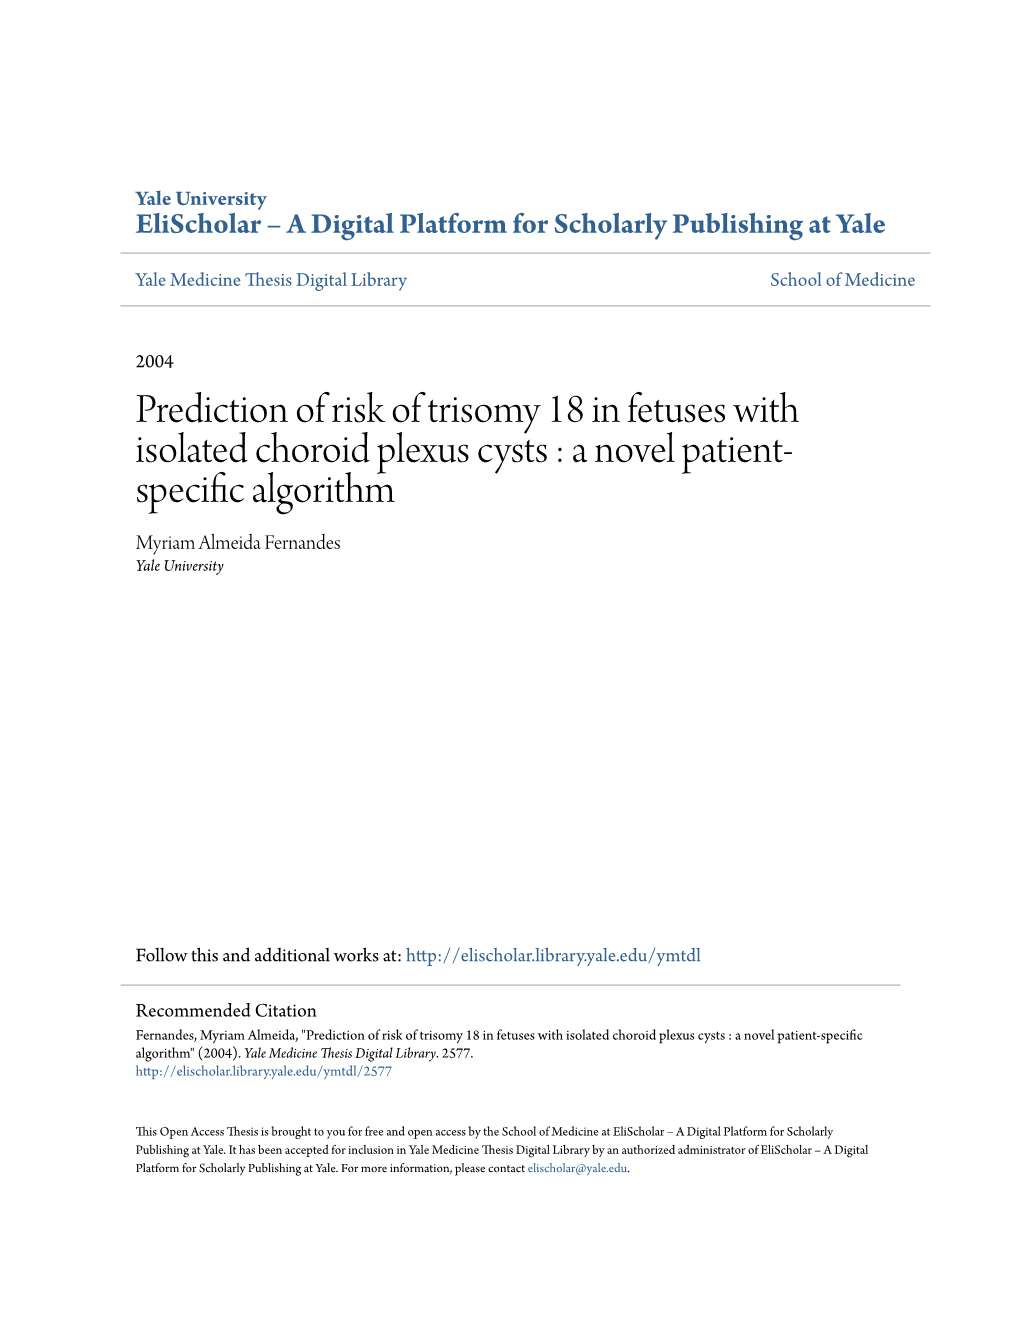 Prediction of Risk of Trisomy 18 in Fetuses with Isolated Choroid Plexus Cysts : a Novel Patient- Specific Algorithm Myriam Almeida Fernandes Yale University